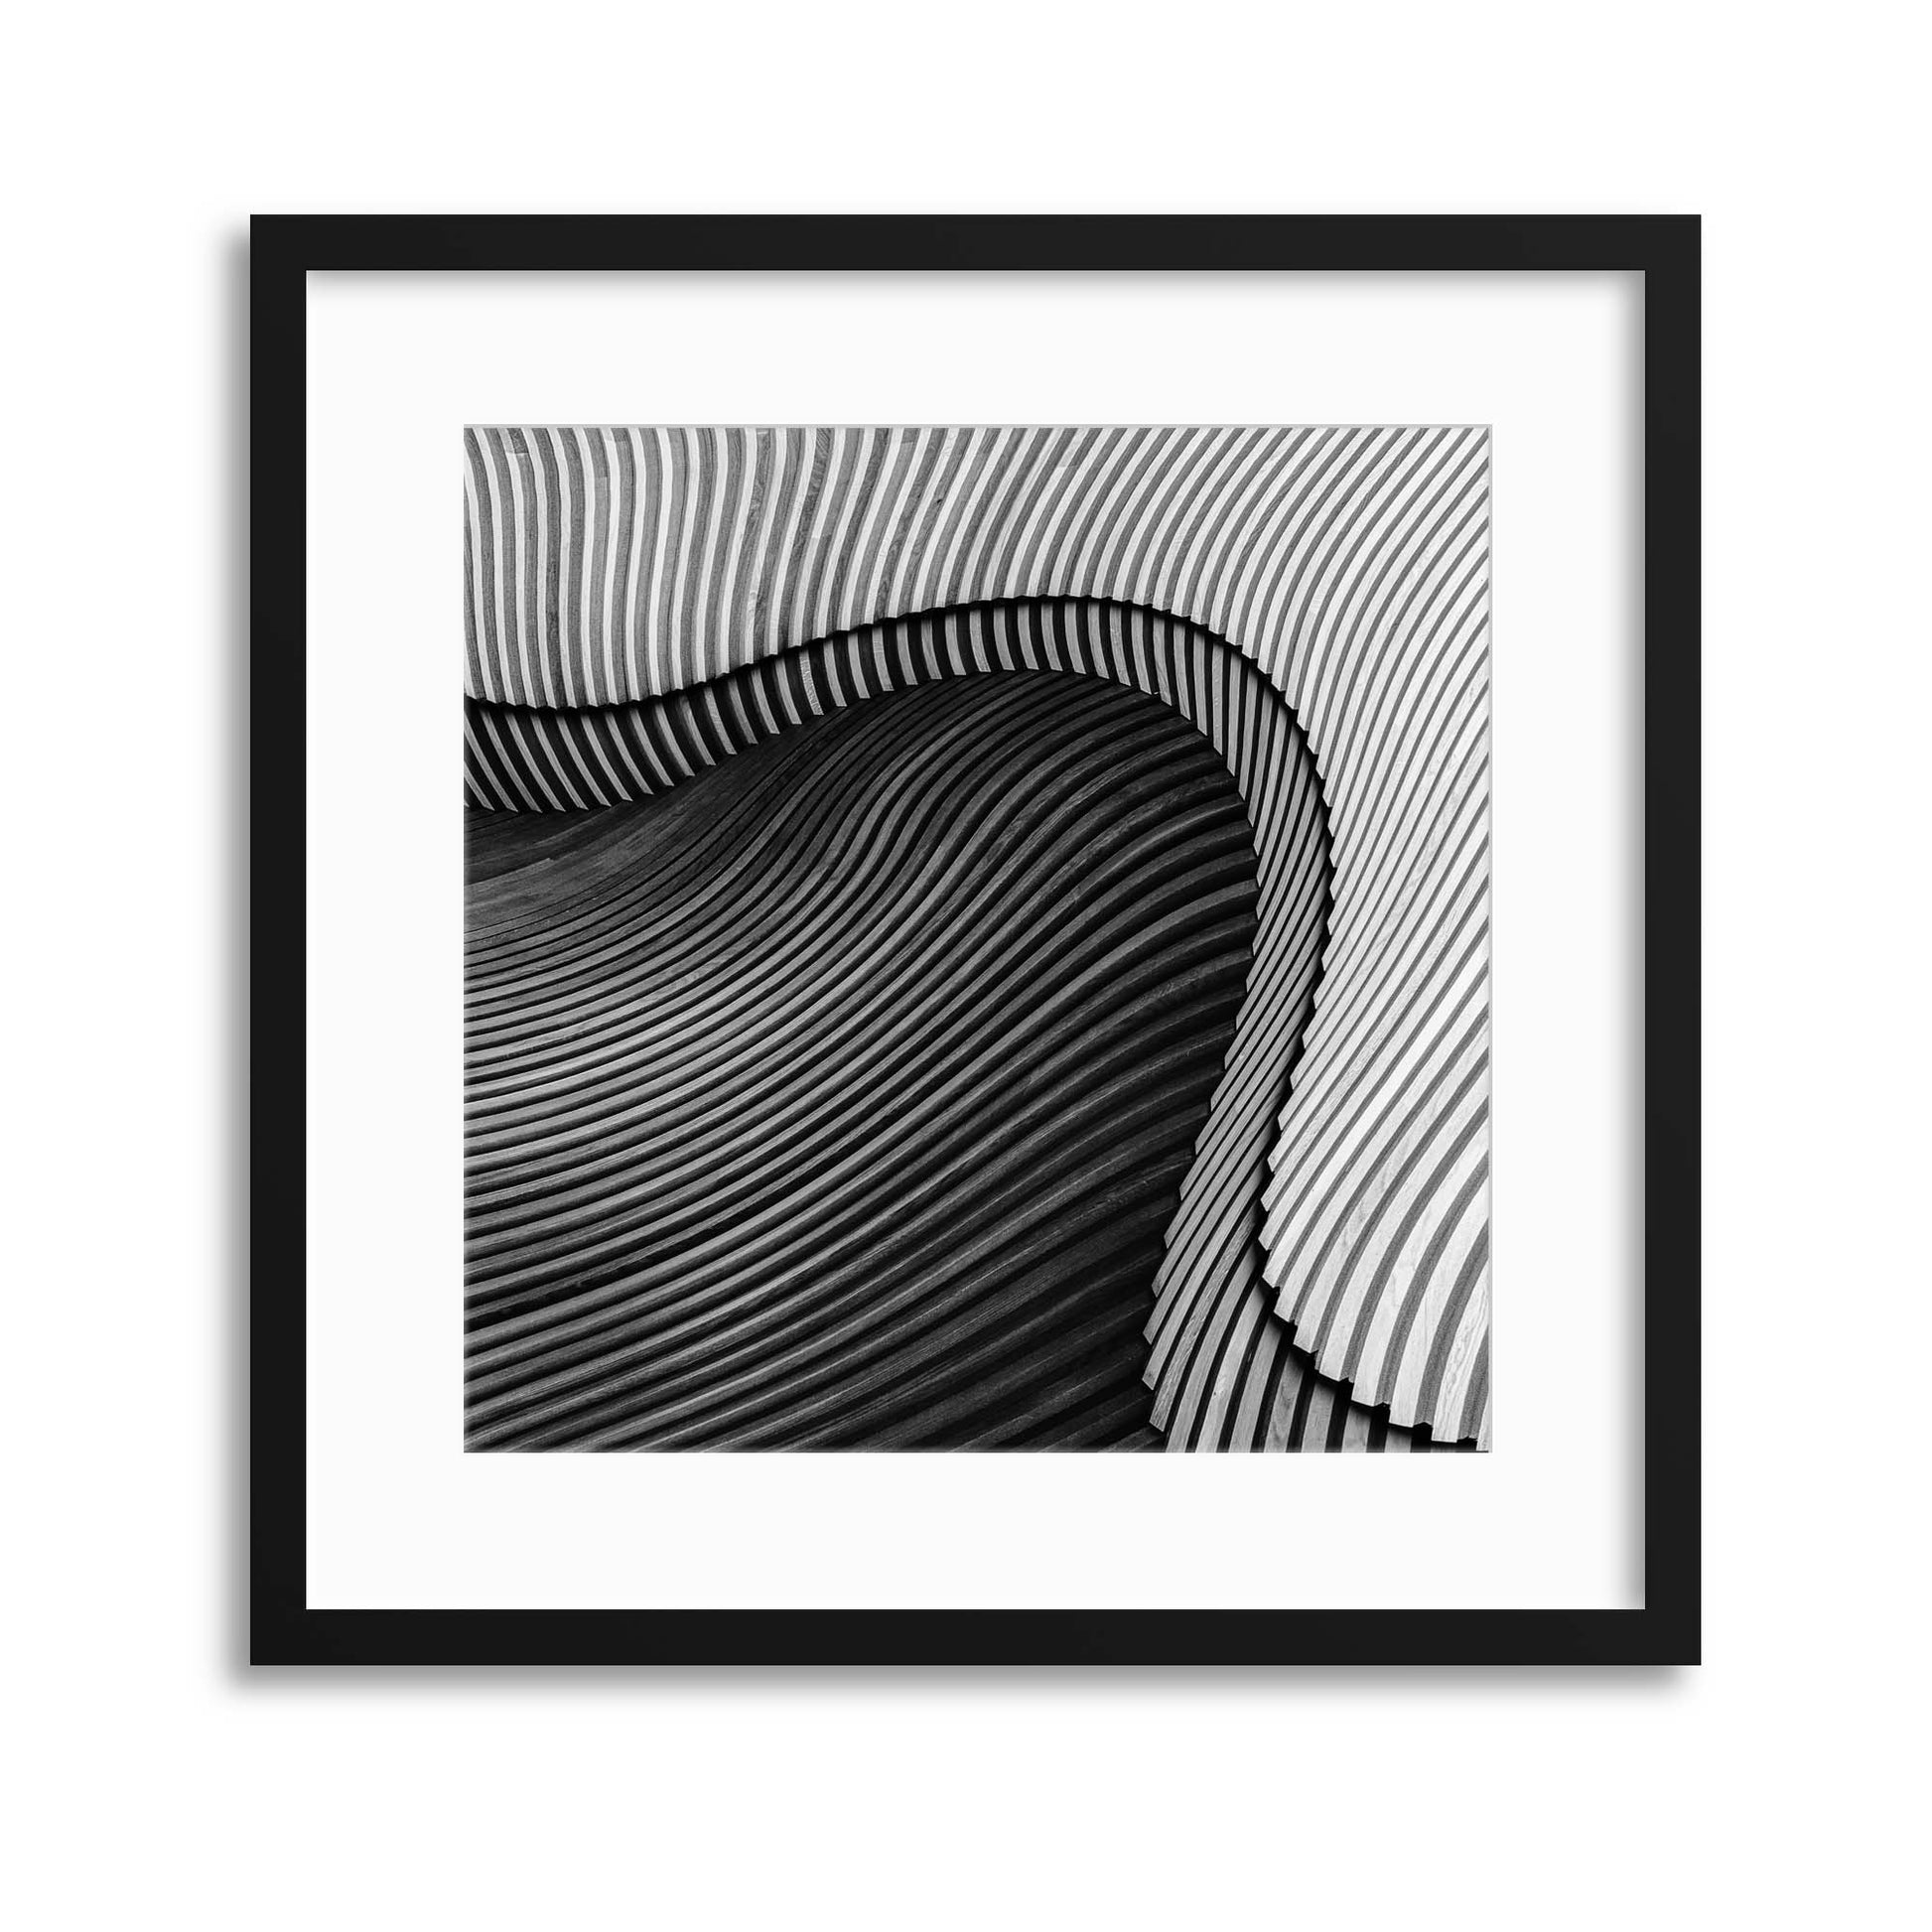 The Wood Project II - Sea Shore by Luc Vangindertael Framed Print - USTAD HOME